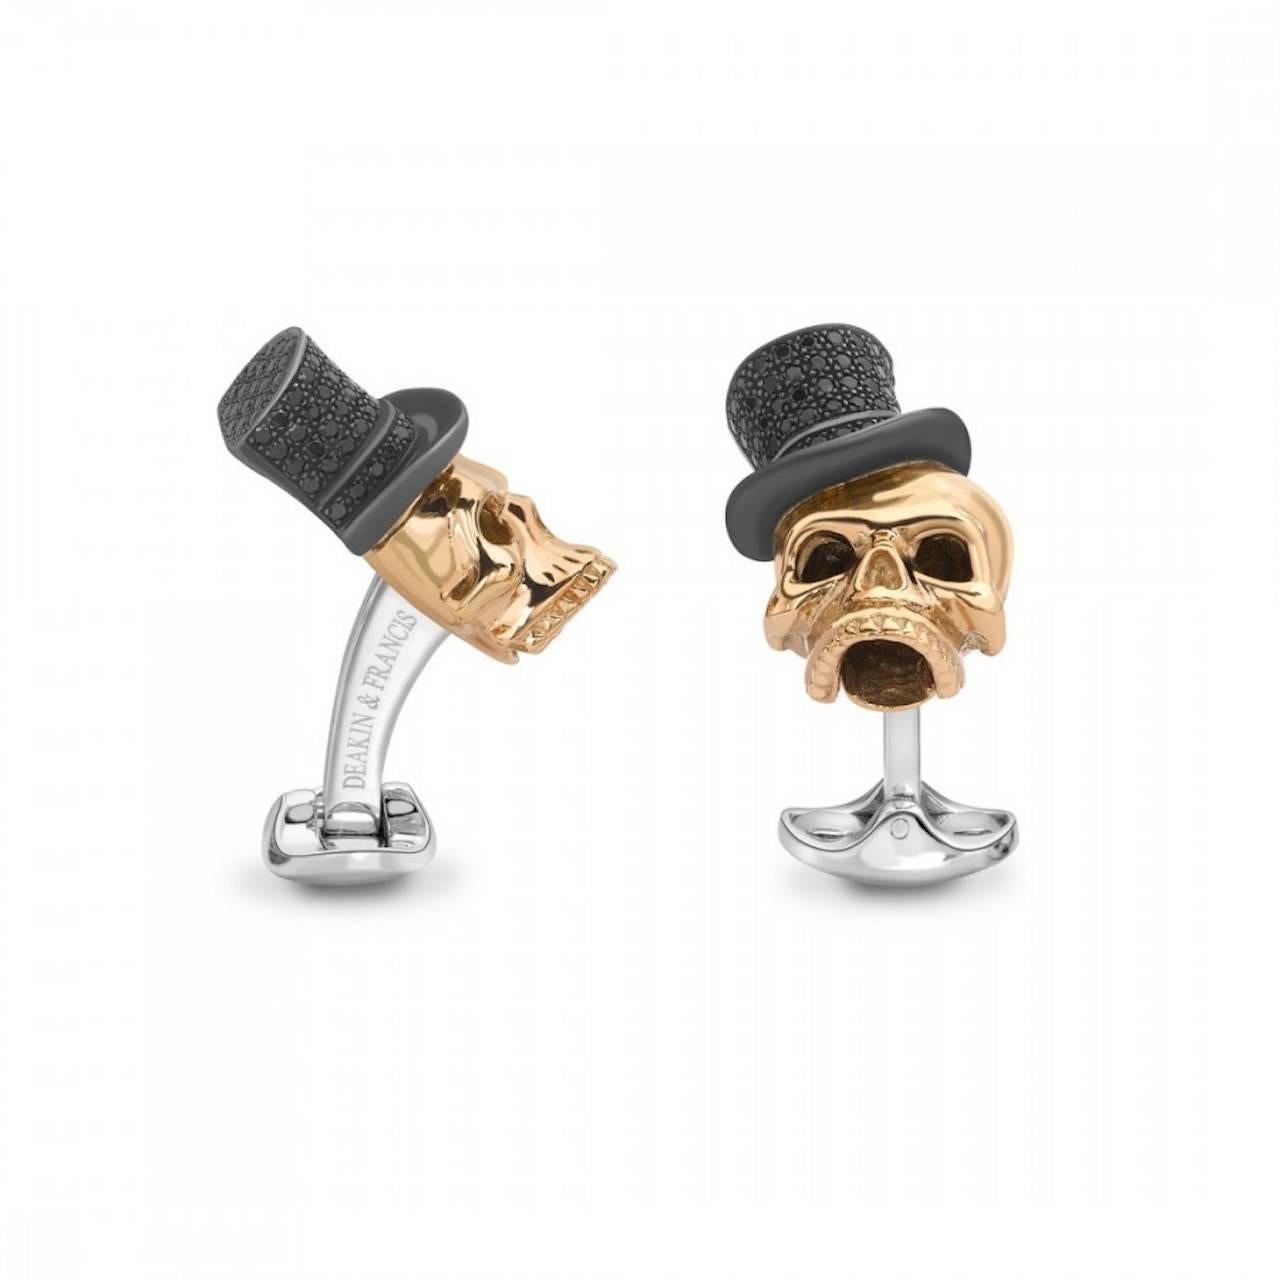 

PLEASE NOTE: OUR PRICE IS FULLY INCLUSIVE OF SHIPPING, IMPORTATION TAXES & DUTIES.

The Deakin & Francis hallmark skull design has been a part of the collection for generations.

These sterling silver statement skull cufflinks have been